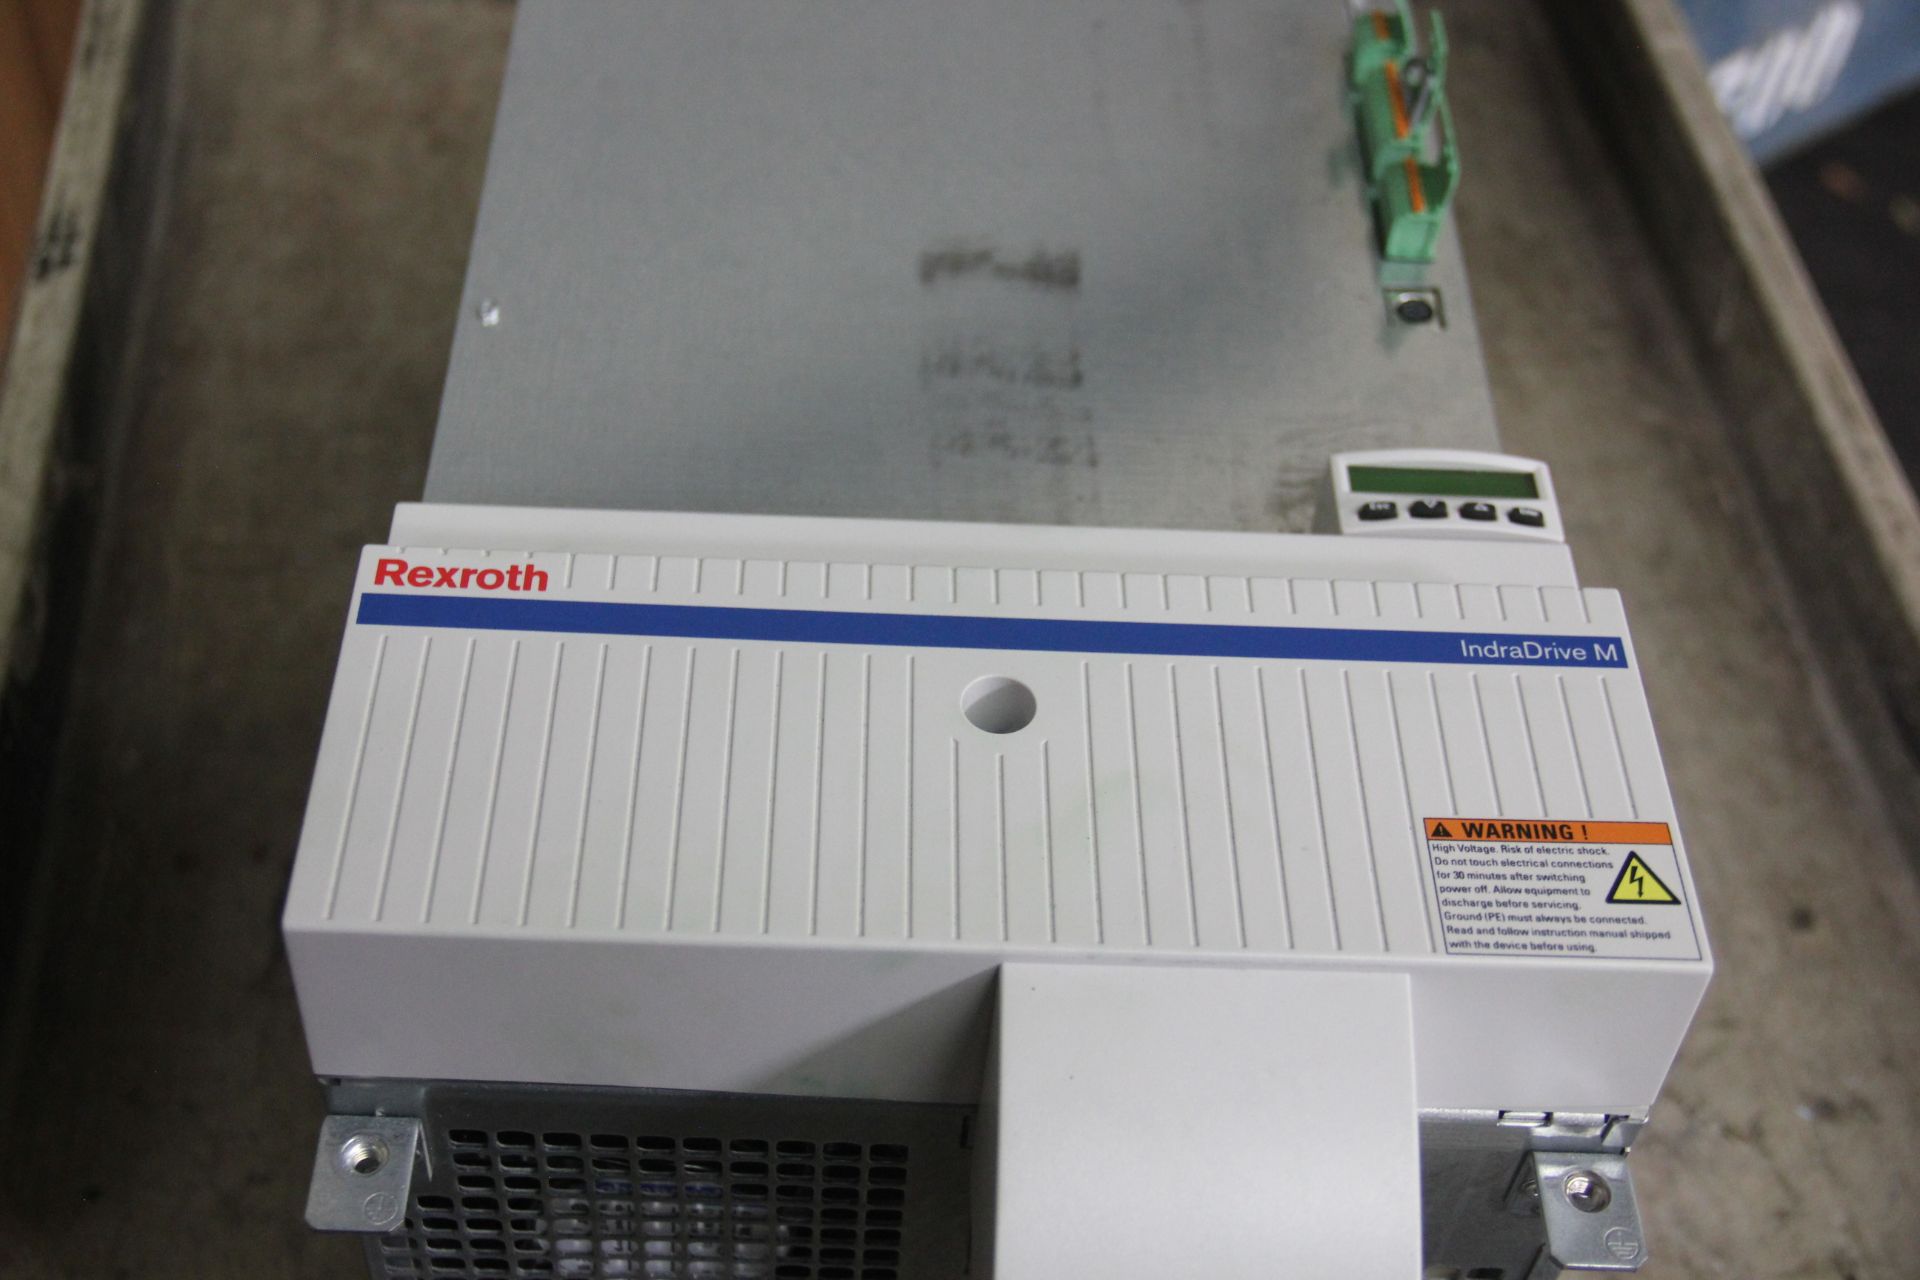 REXROTH INDRADRIVE M POWER SUPPLY - Image 5 of 7